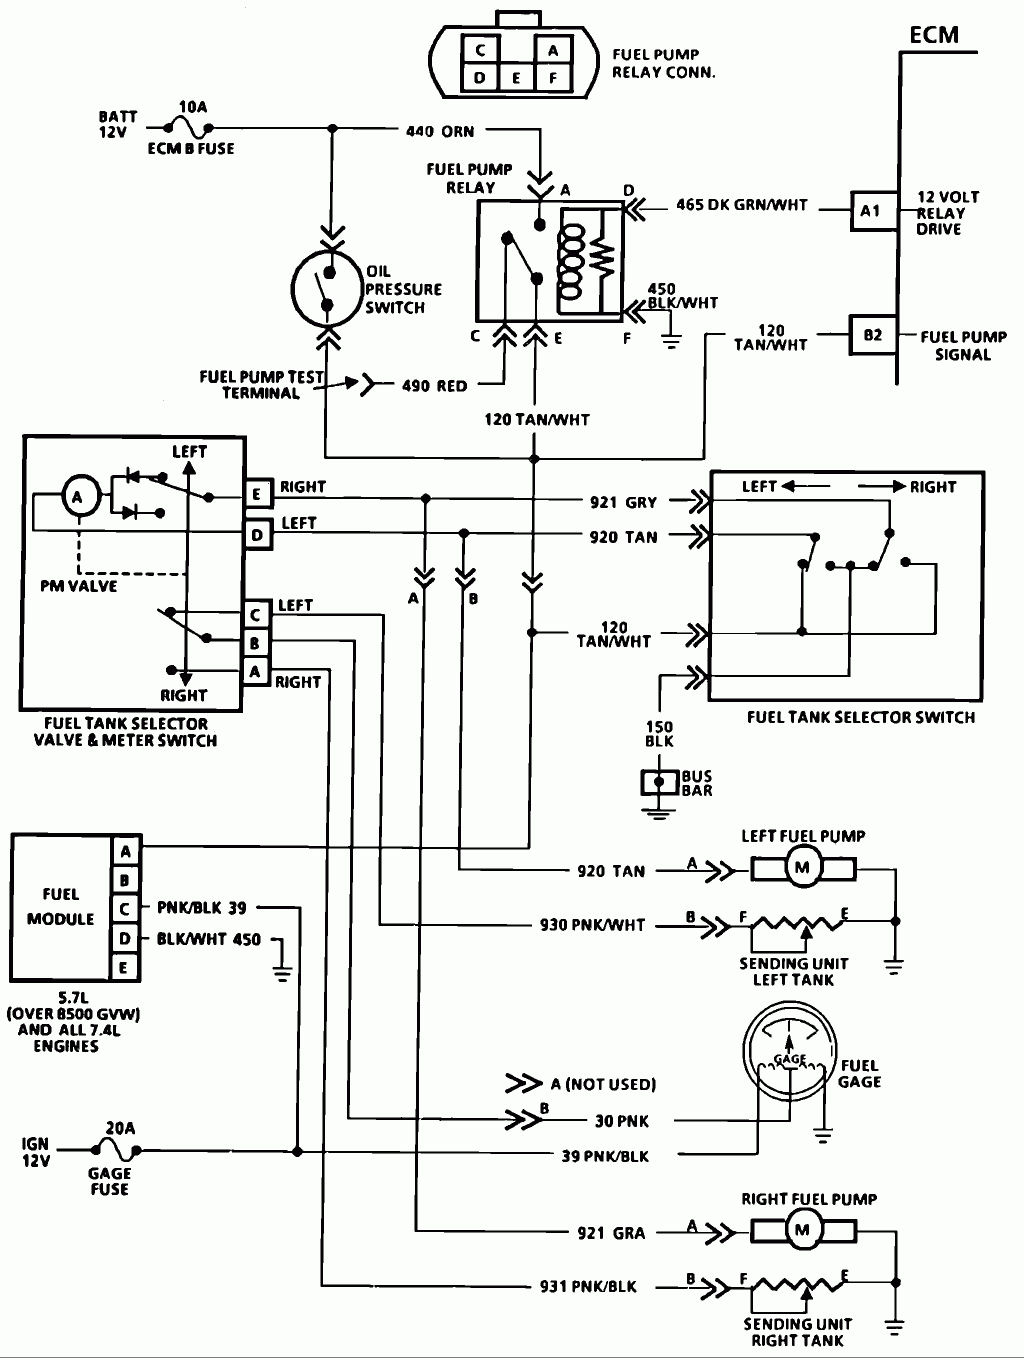 Chevy Truck Fuel Pump Wiring - Wiring Diagrams Hubs - 1989 Chevy Truck Wiring Diagram